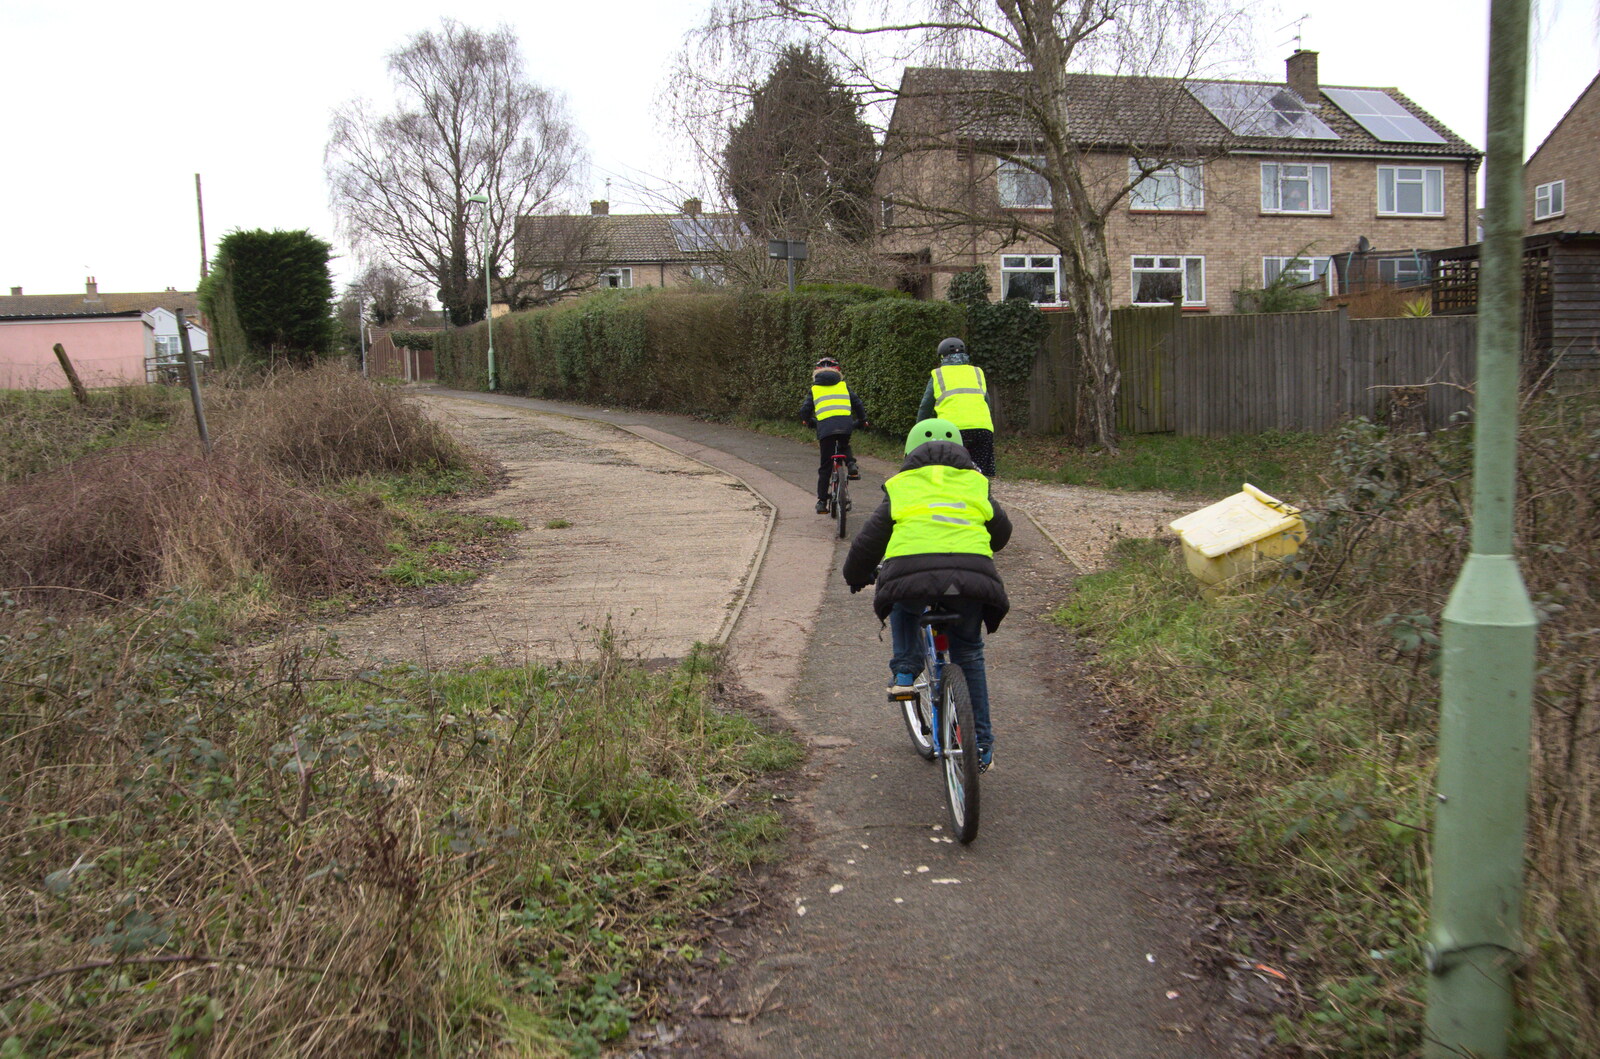 Cycling up the hill to Ash Drive from A Trip to the Blue Shop, Church Street, Eye, Suffolk - 2nd February 2021